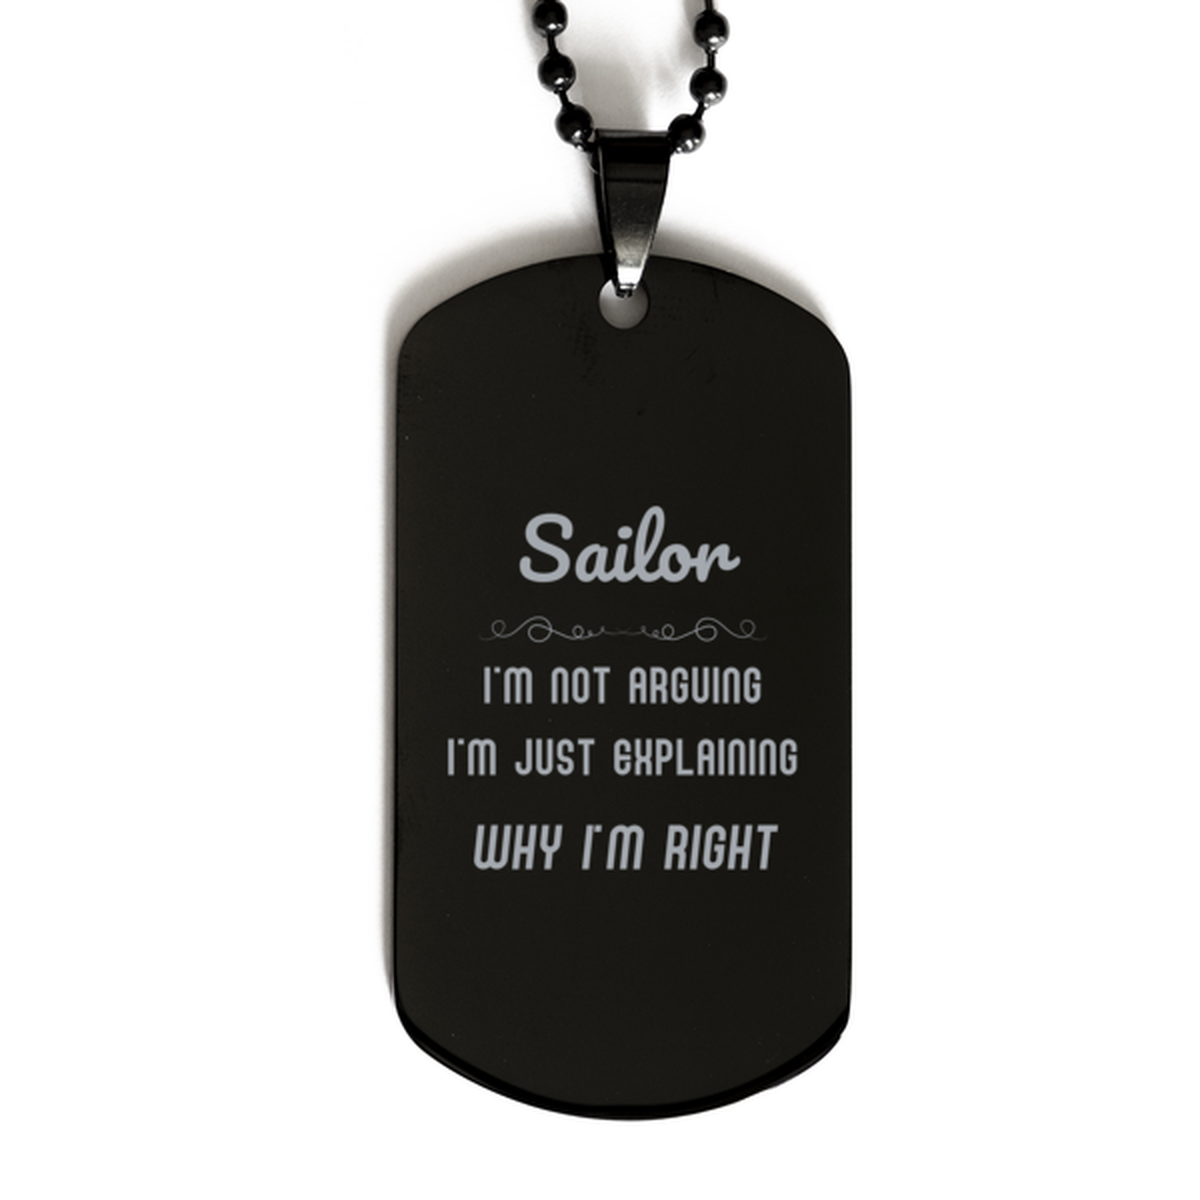 Sailor I'm not Arguing. I'm Just Explaining Why I'm RIGHT Black Dog Tag, Funny Saying Quote Sailor Gifts For Sailor Graduation Birthday Christmas Gifts for Men Women Coworker